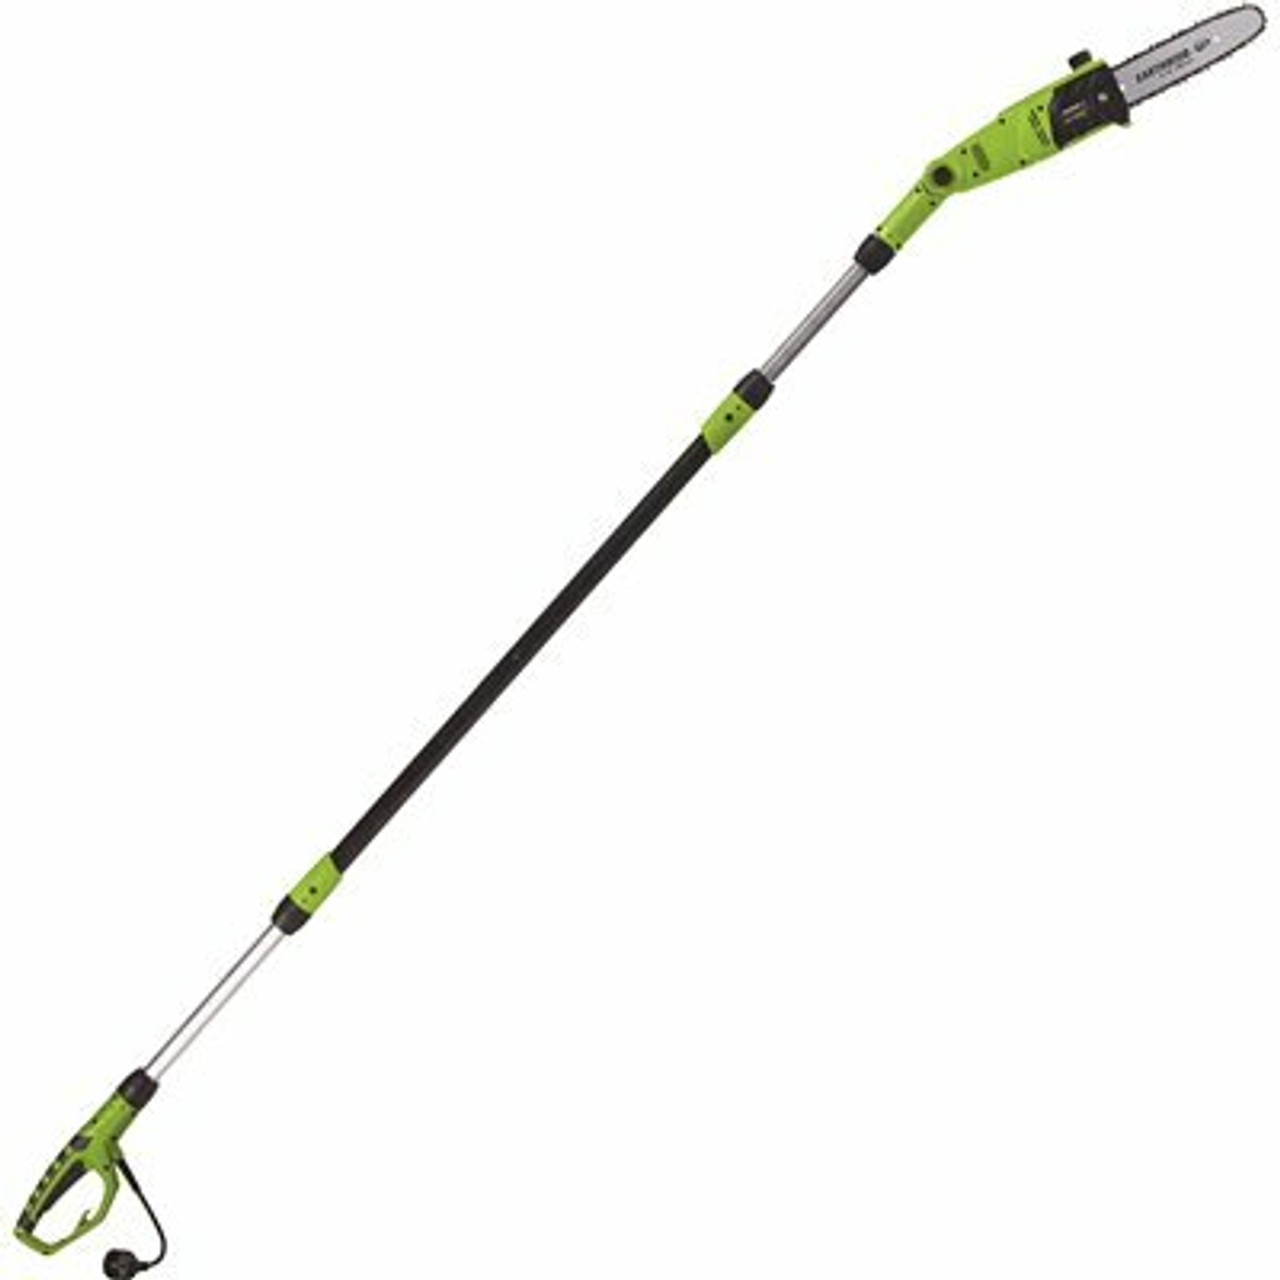 Earthwise 8 In. 6.5 Amp Electric Pole Saw